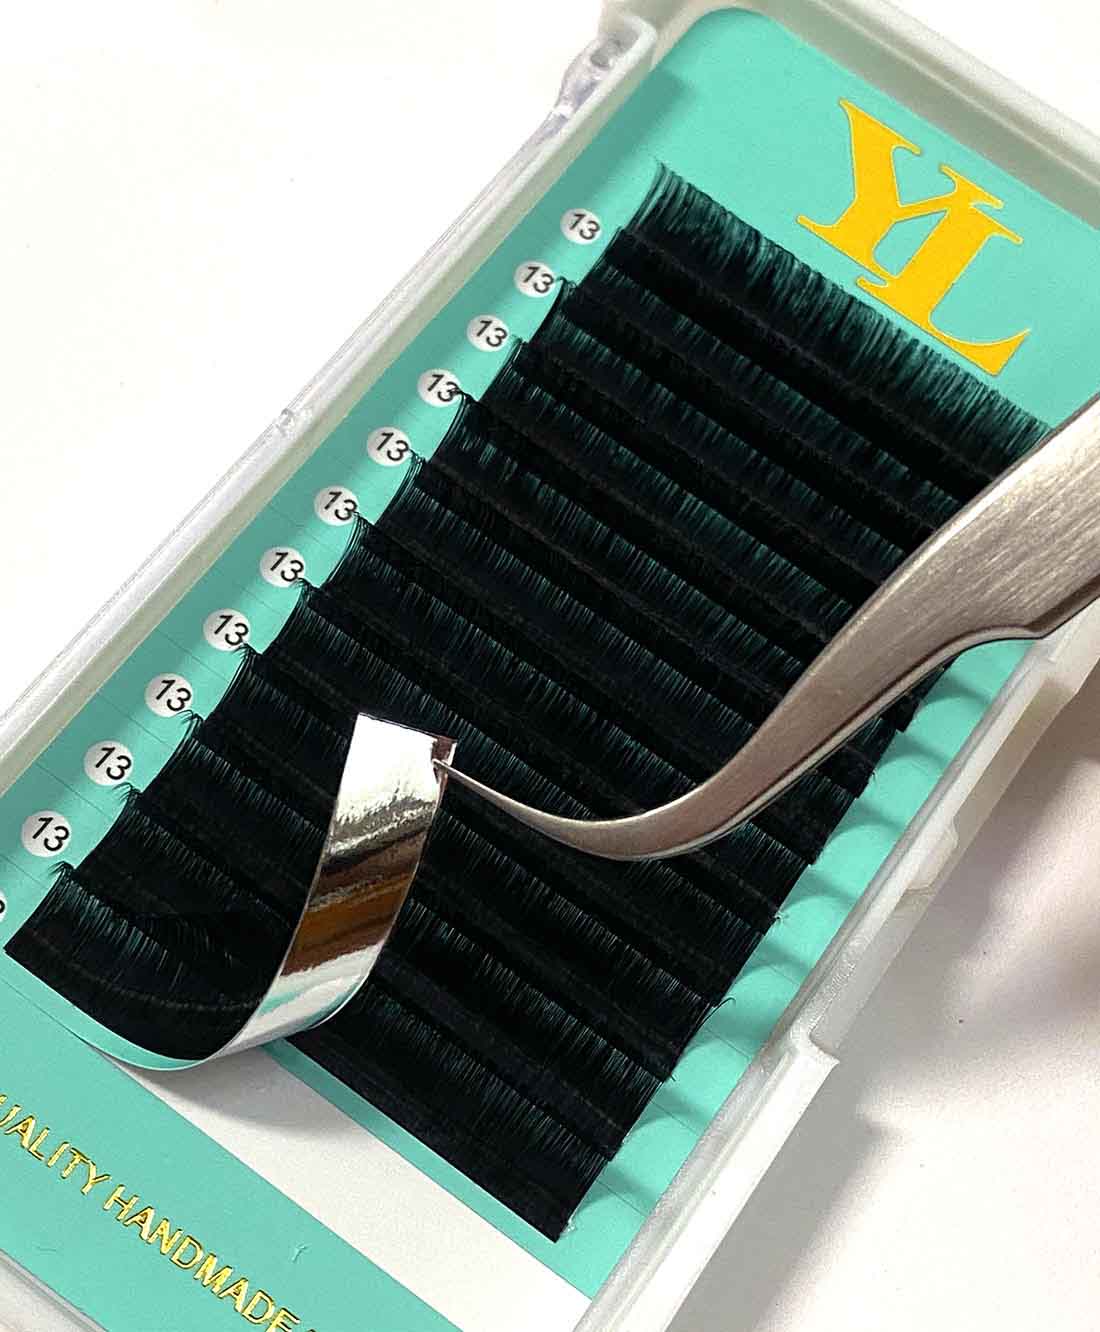 Free Sample Two Trays Cashmere Lash【First time Buyer ONLY】order one tray regular price lash, then you qualify to use this link to add two free trays